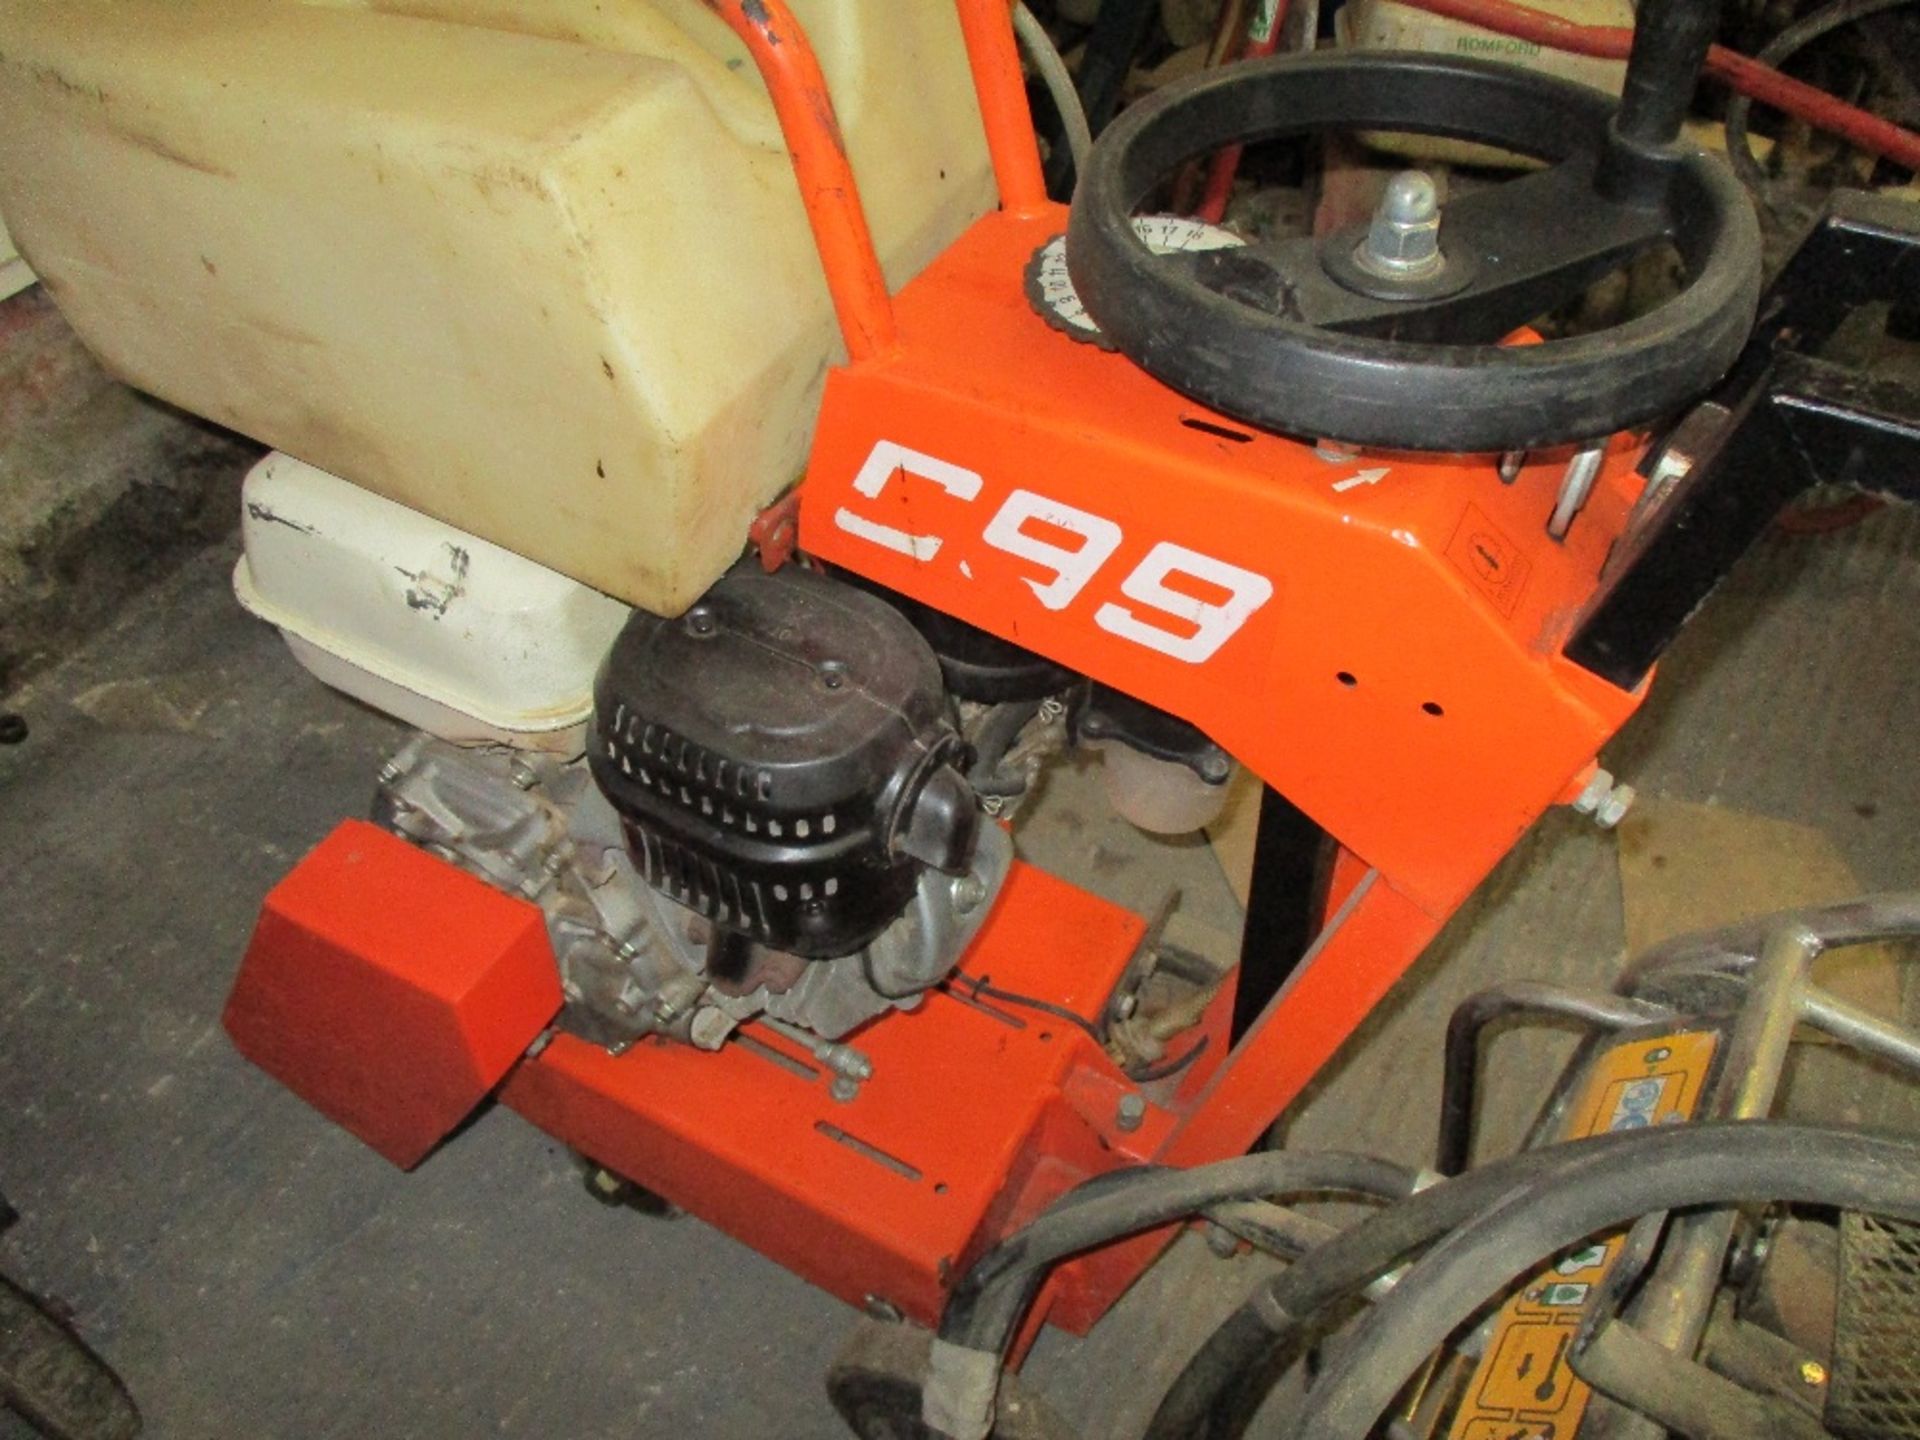 2 X CLIPPER C99 FLOOR SAWS...SOLD AS ONE LOT - Image 6 of 7